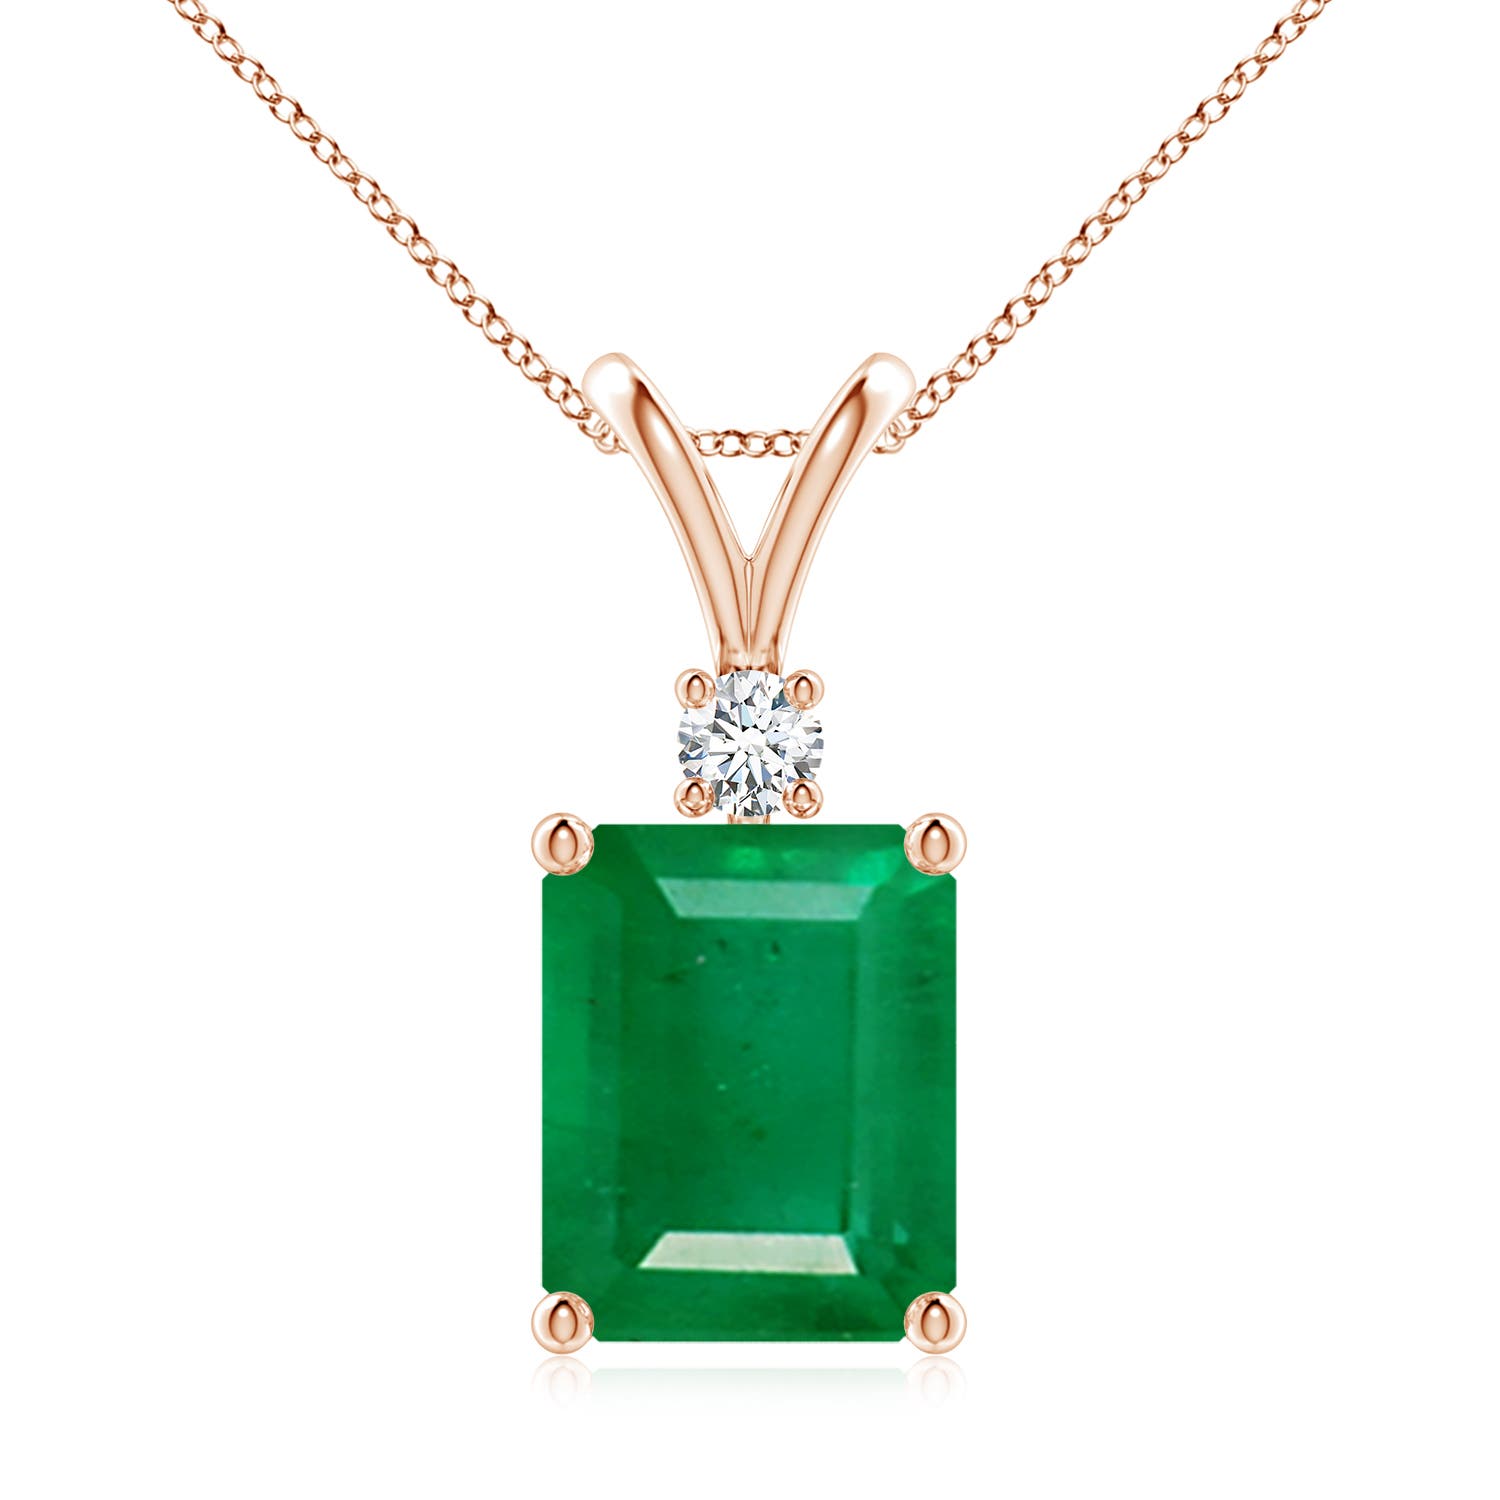 AA - Emerald / 2.96 CT / 14 KT Rose Gold